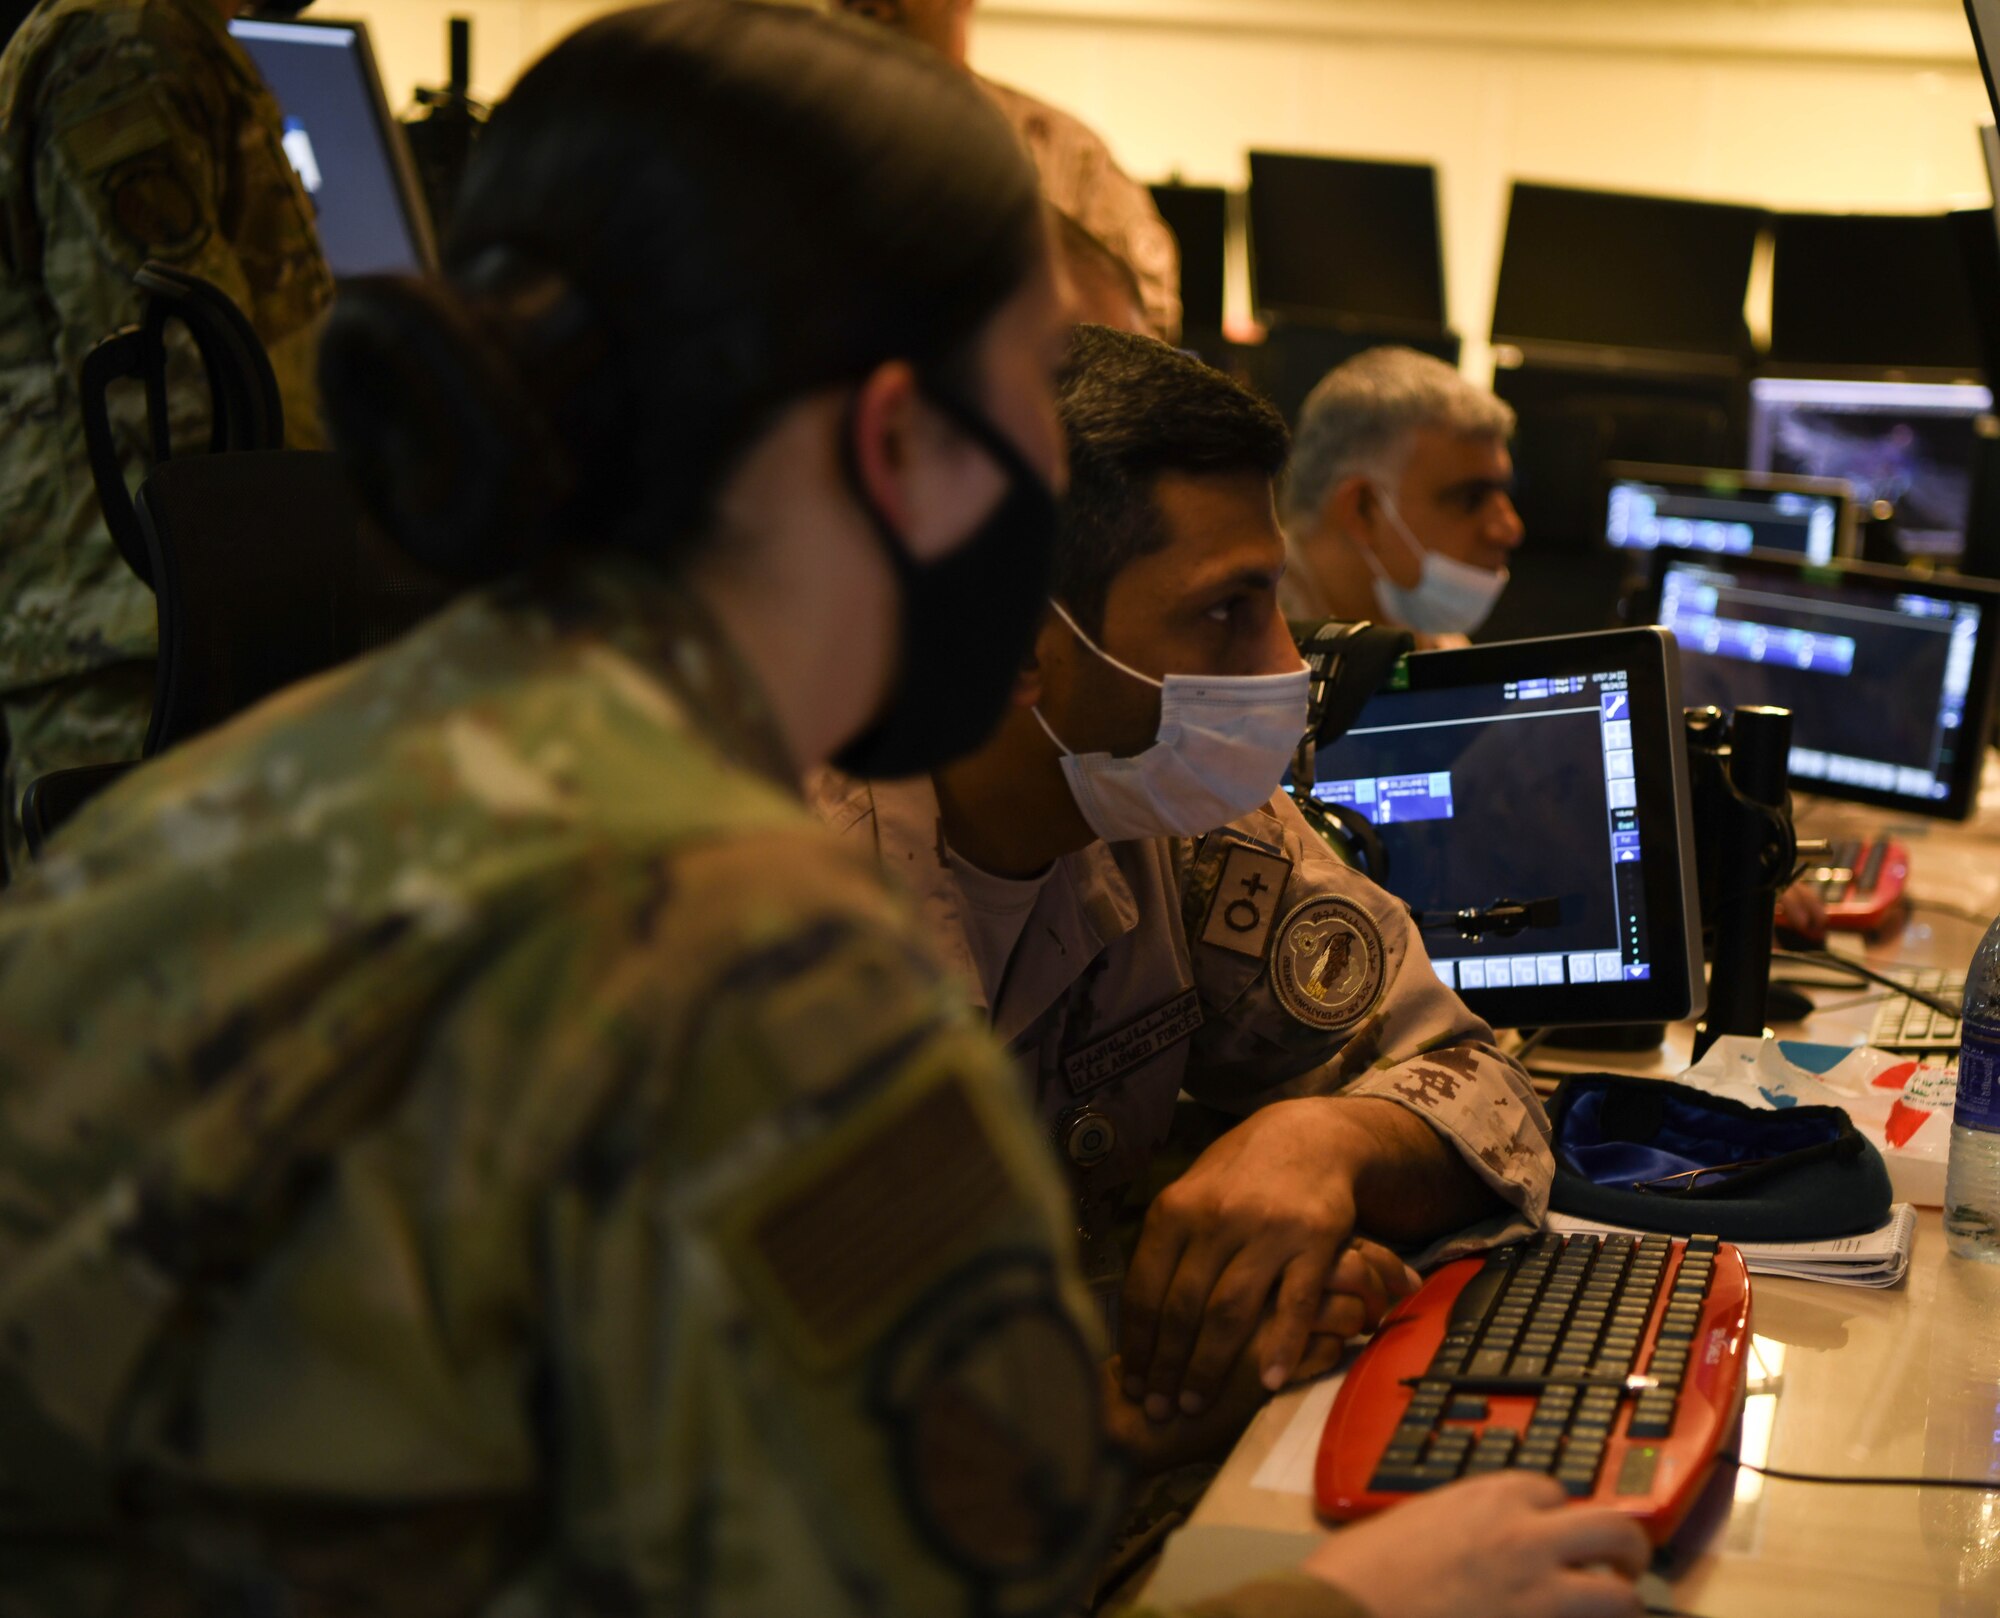 Lt. Col. Sulayman Al-Naqbi (center), a United Arab Emirates Air Operations Center weapons director, along with Col. Abdallah Ali Mohamed Al-Bloushi, U.A.E. AOC deputy commander, look into computer monitors during a visit to the 727th Expeditionary Air Control Squadron headquarters (Kingpin), August 24, 2020, in Al Dhafra Air Base, United Arab Emirates.